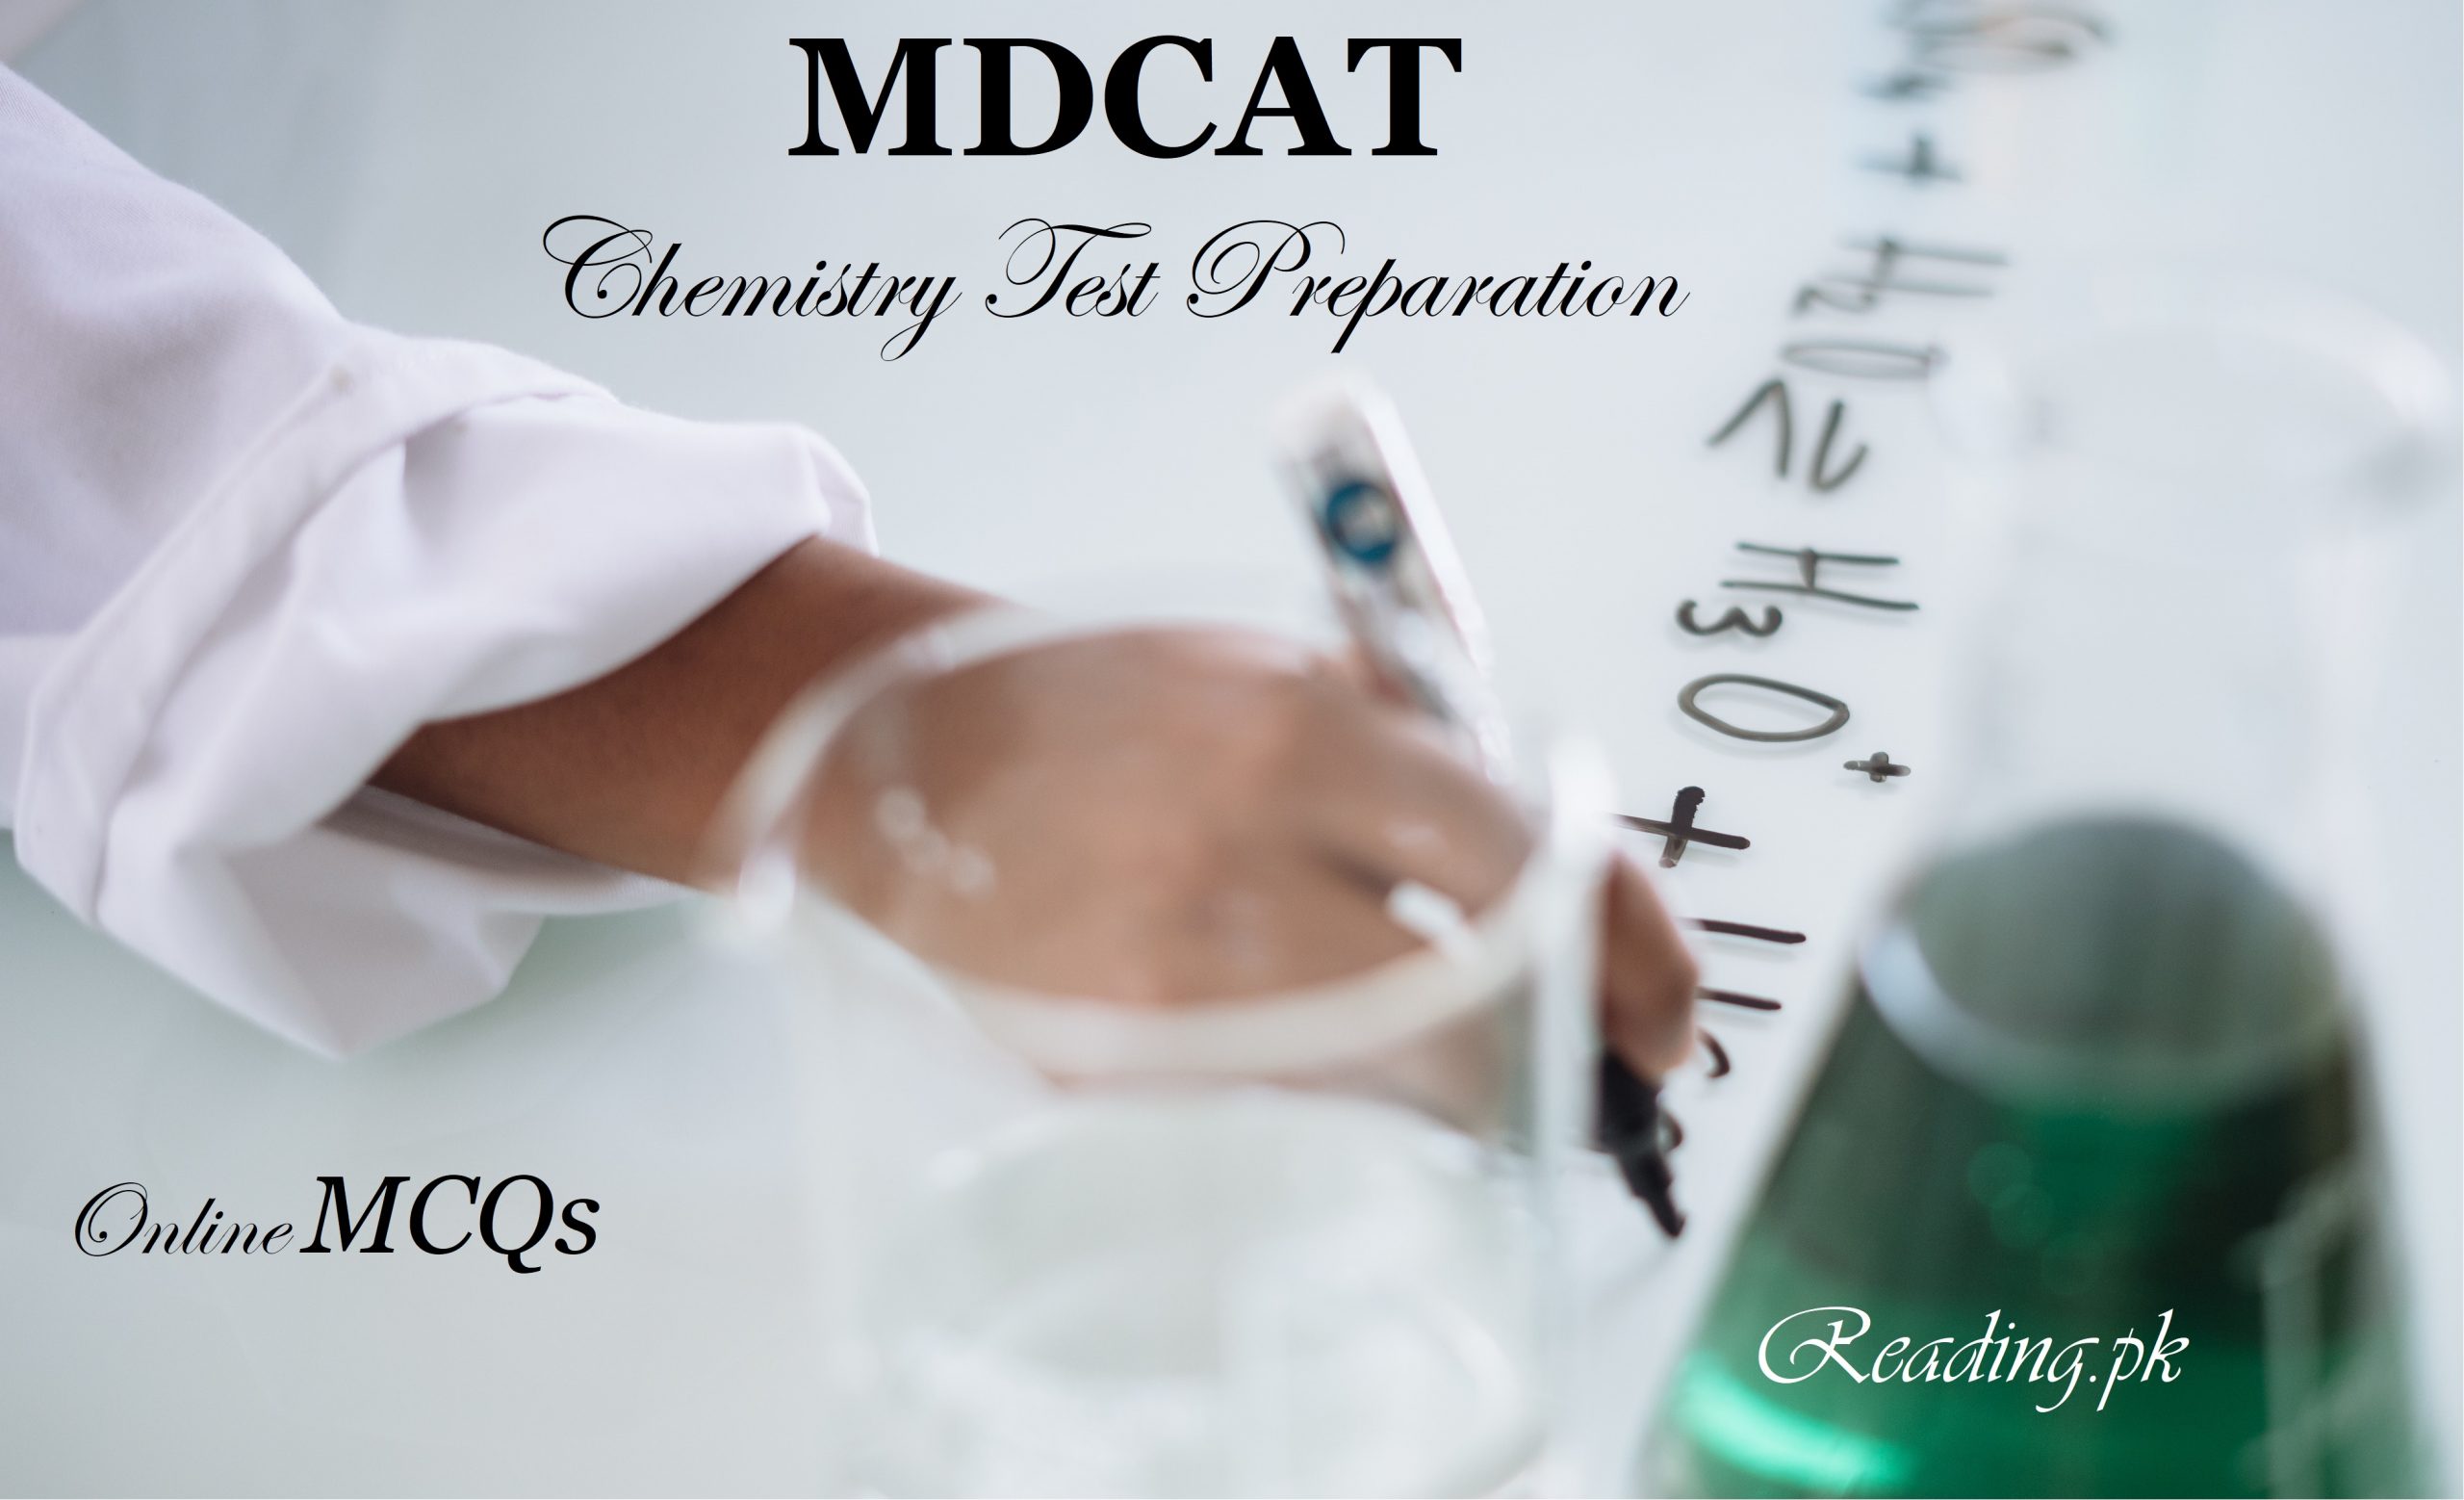 MDCAT Chemistry Test Preparation Online MCQs | Chapter Wise